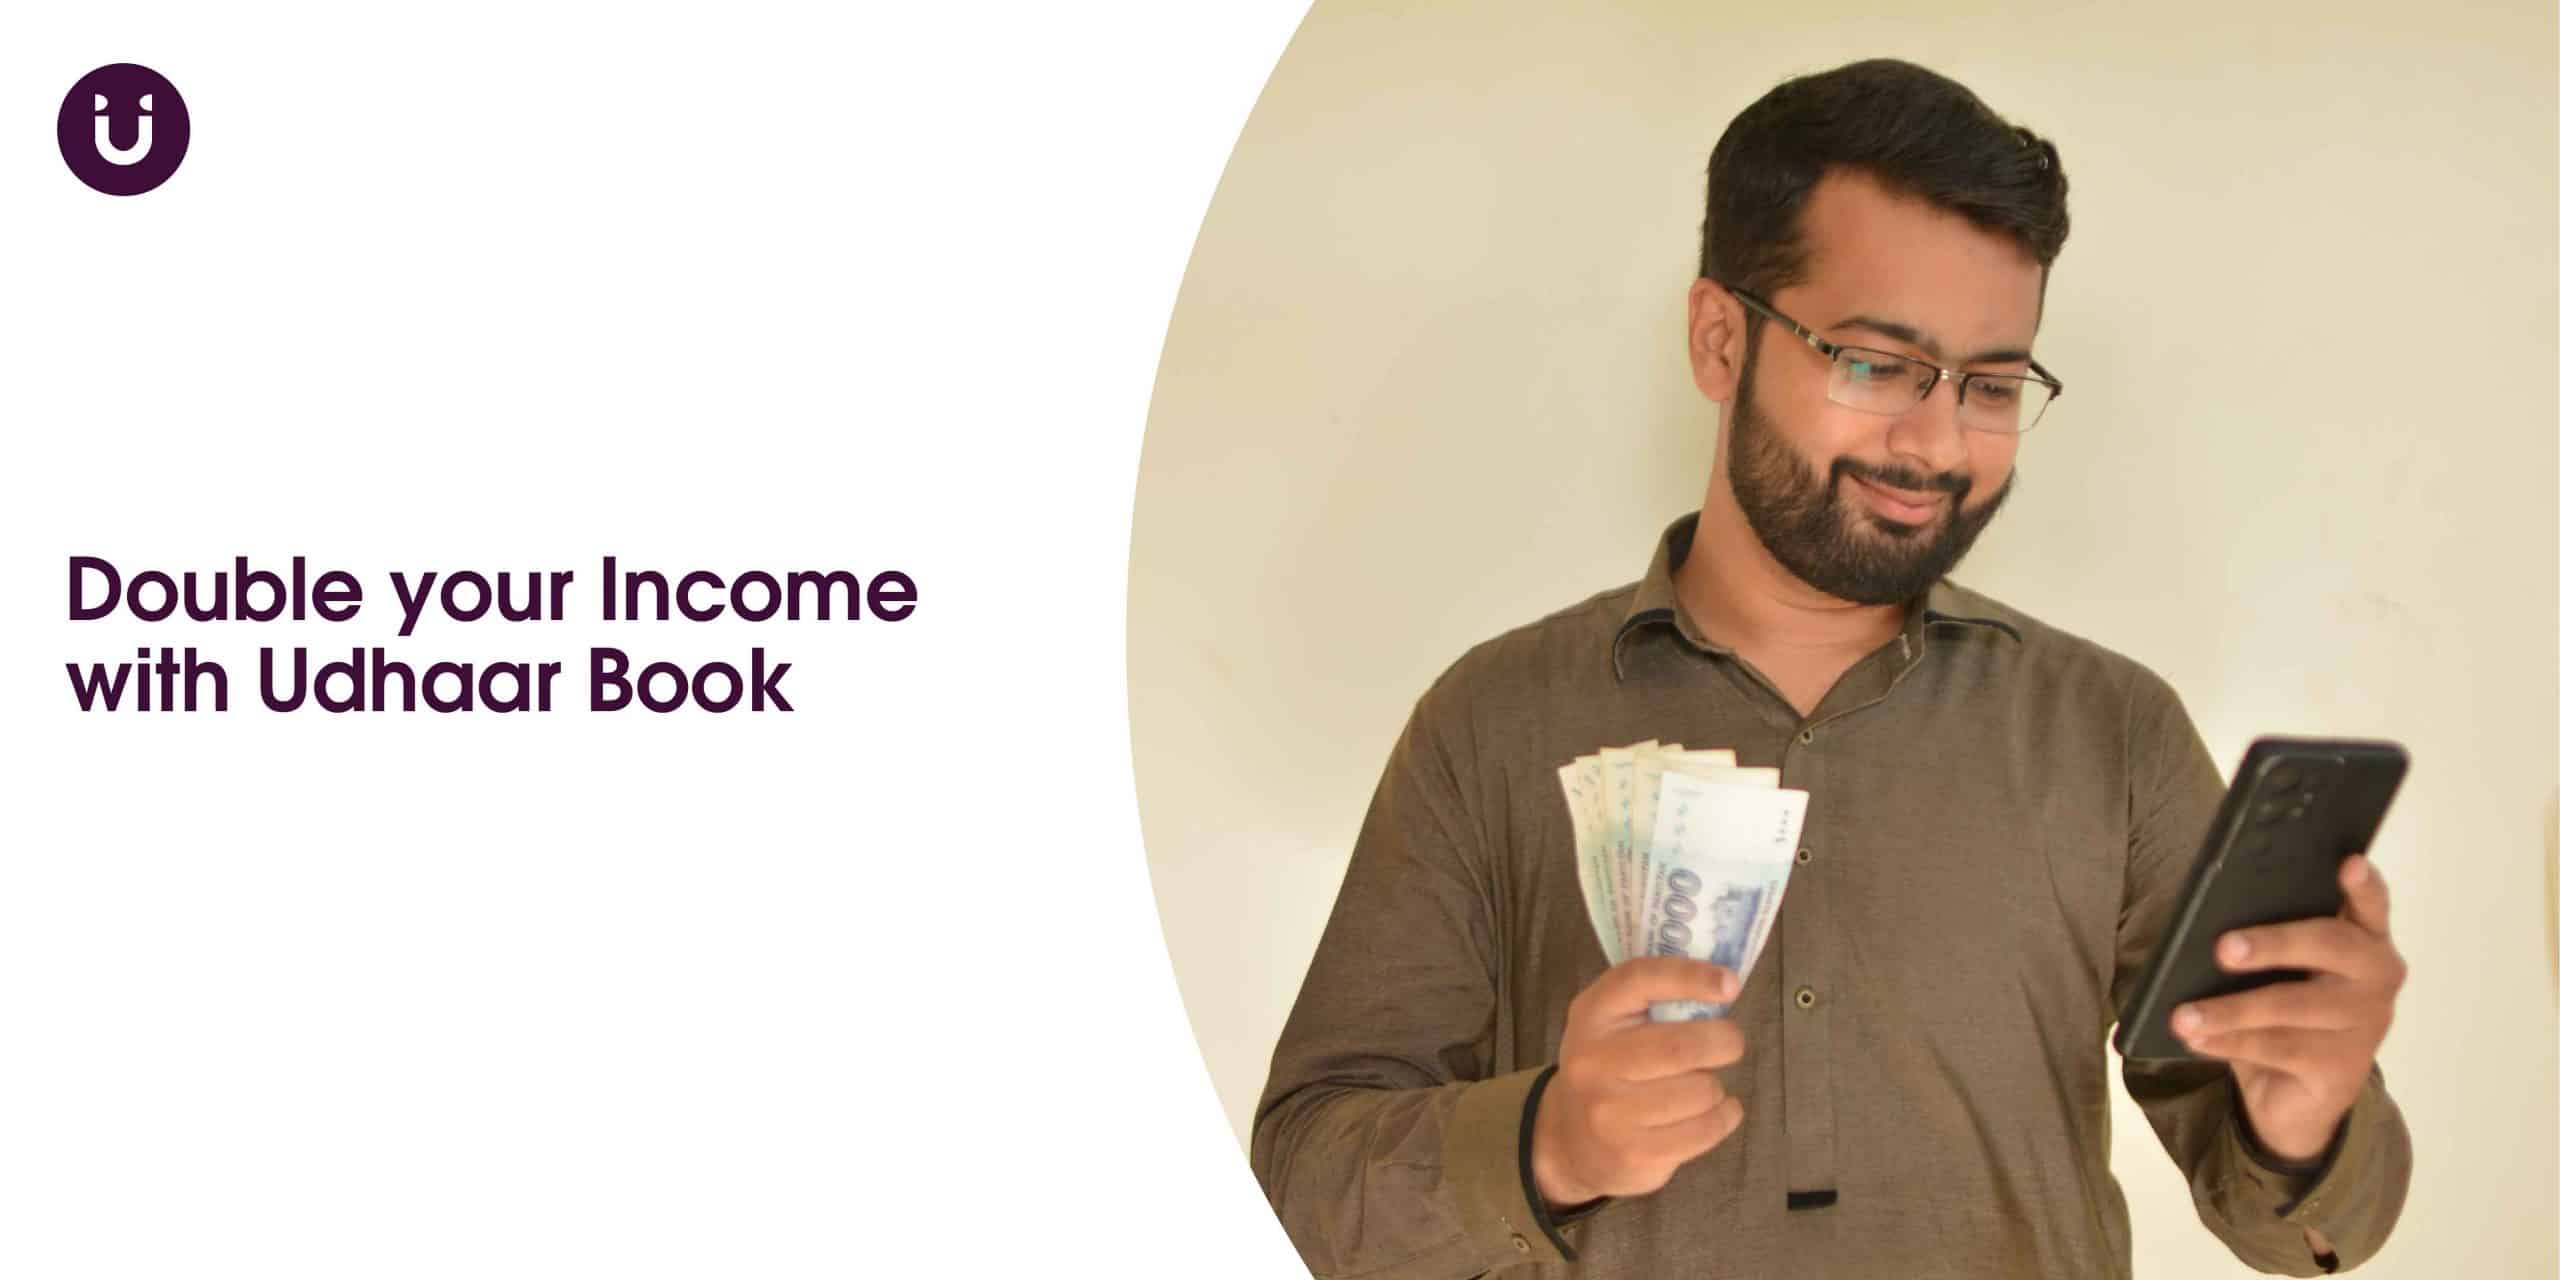 Double your Income with Udhaar Book